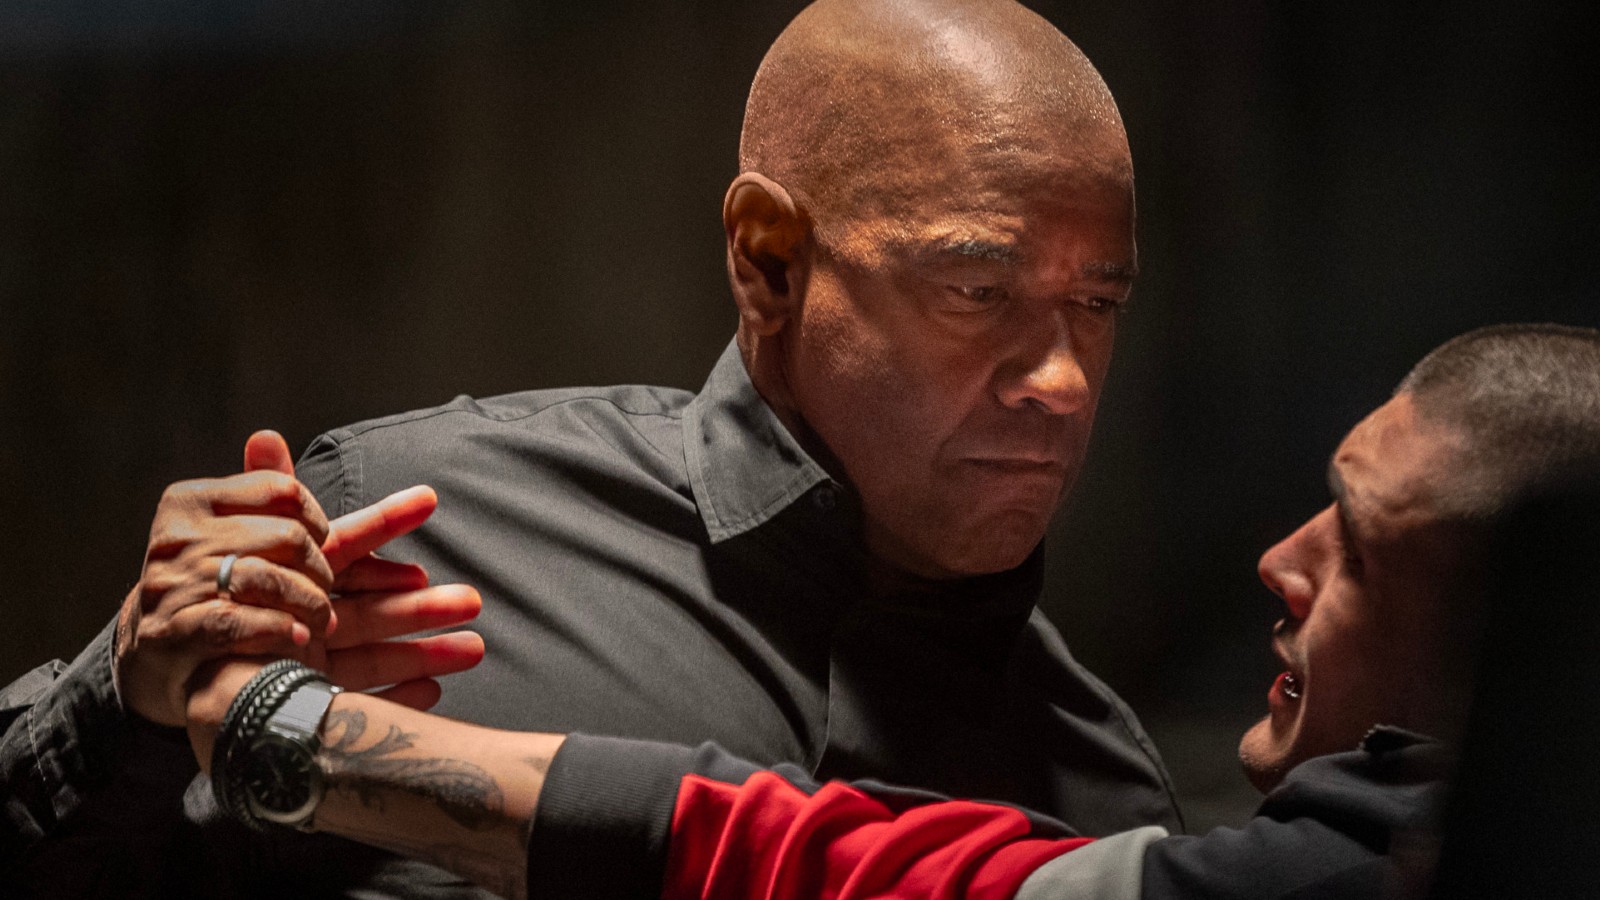 The Equalizer 3' Trailer: Denzel Washington Reunites With Dakota Fanning  For The First Time In Almost 2 Decades For Threequel